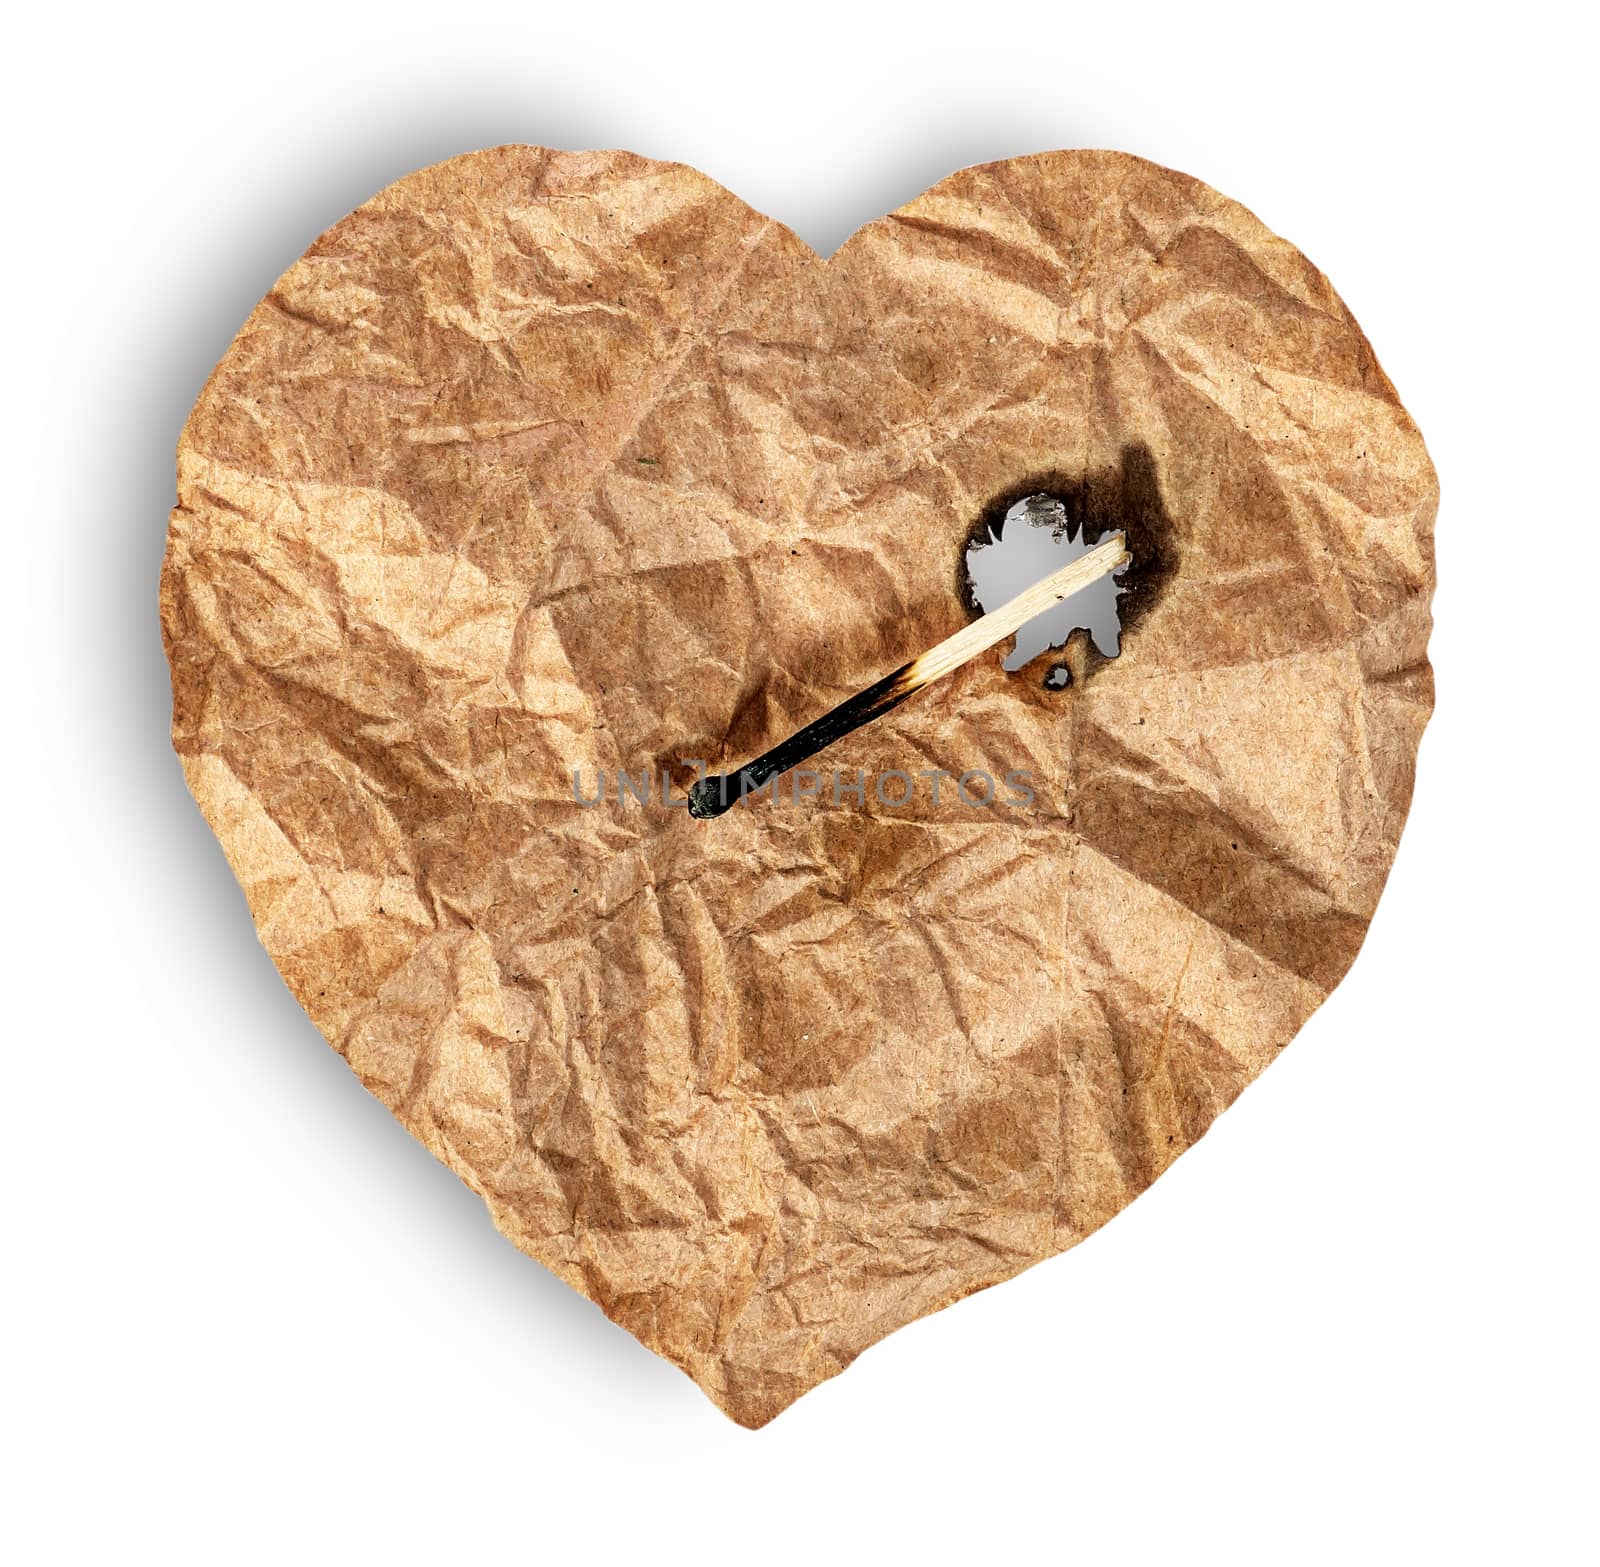 Crumpled paper heart burns match isolated on white background